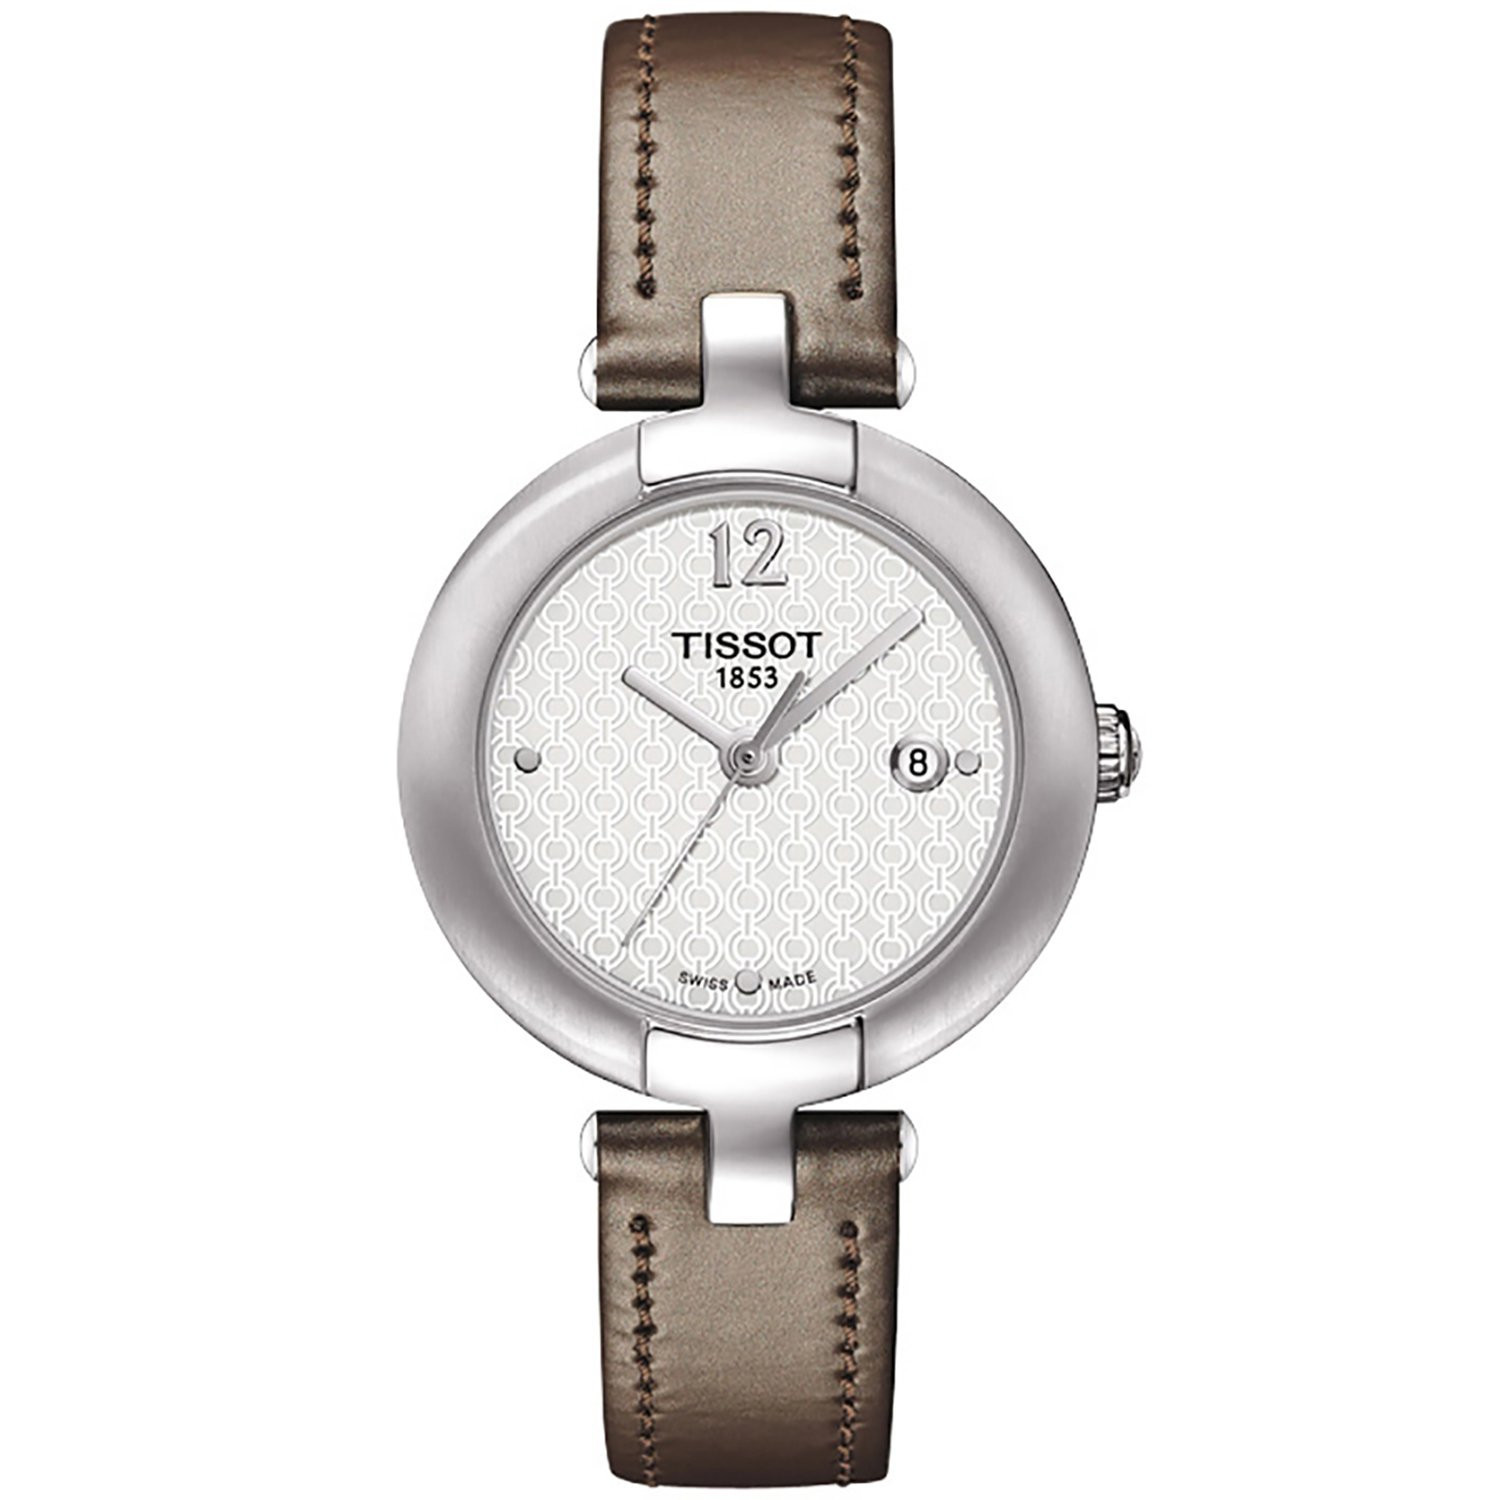 Montre femme Tissot Pinky cuir taupe